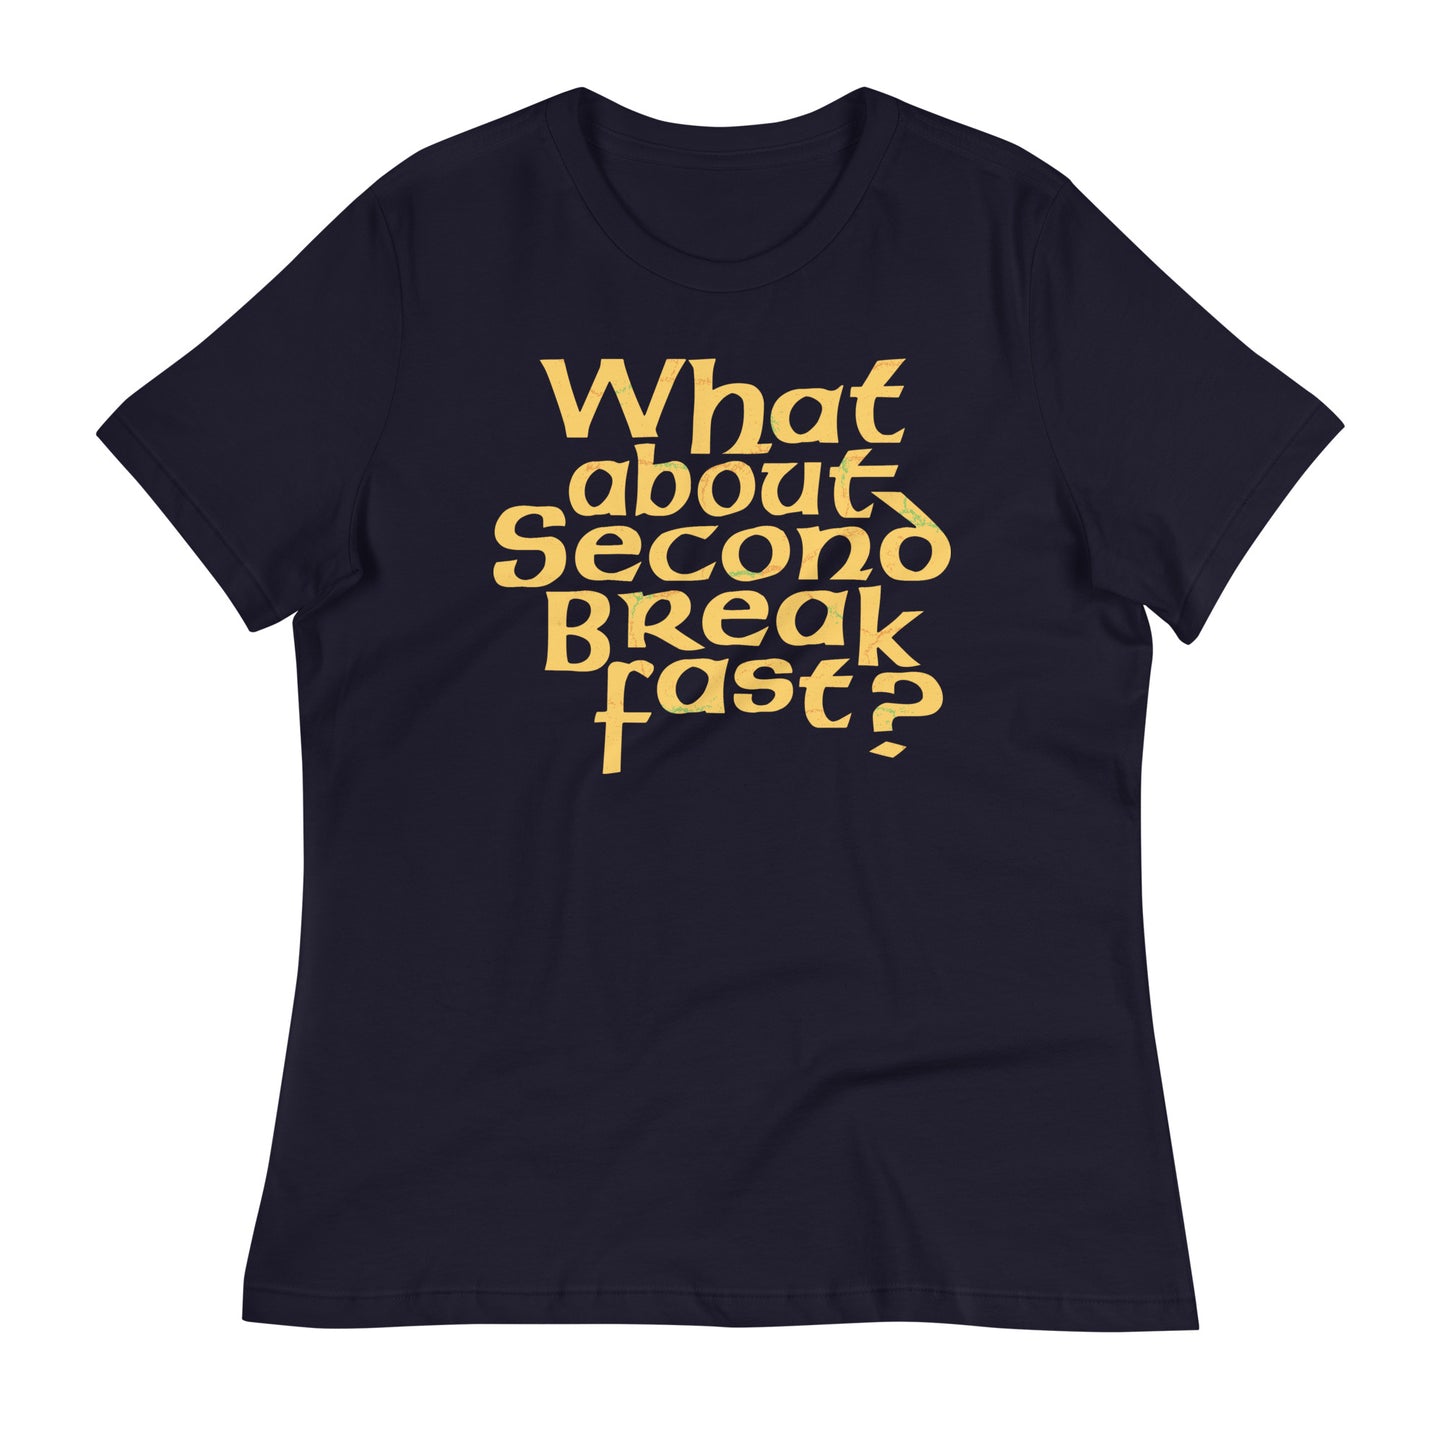 What About Second Breakfast? Women's Signature Tee